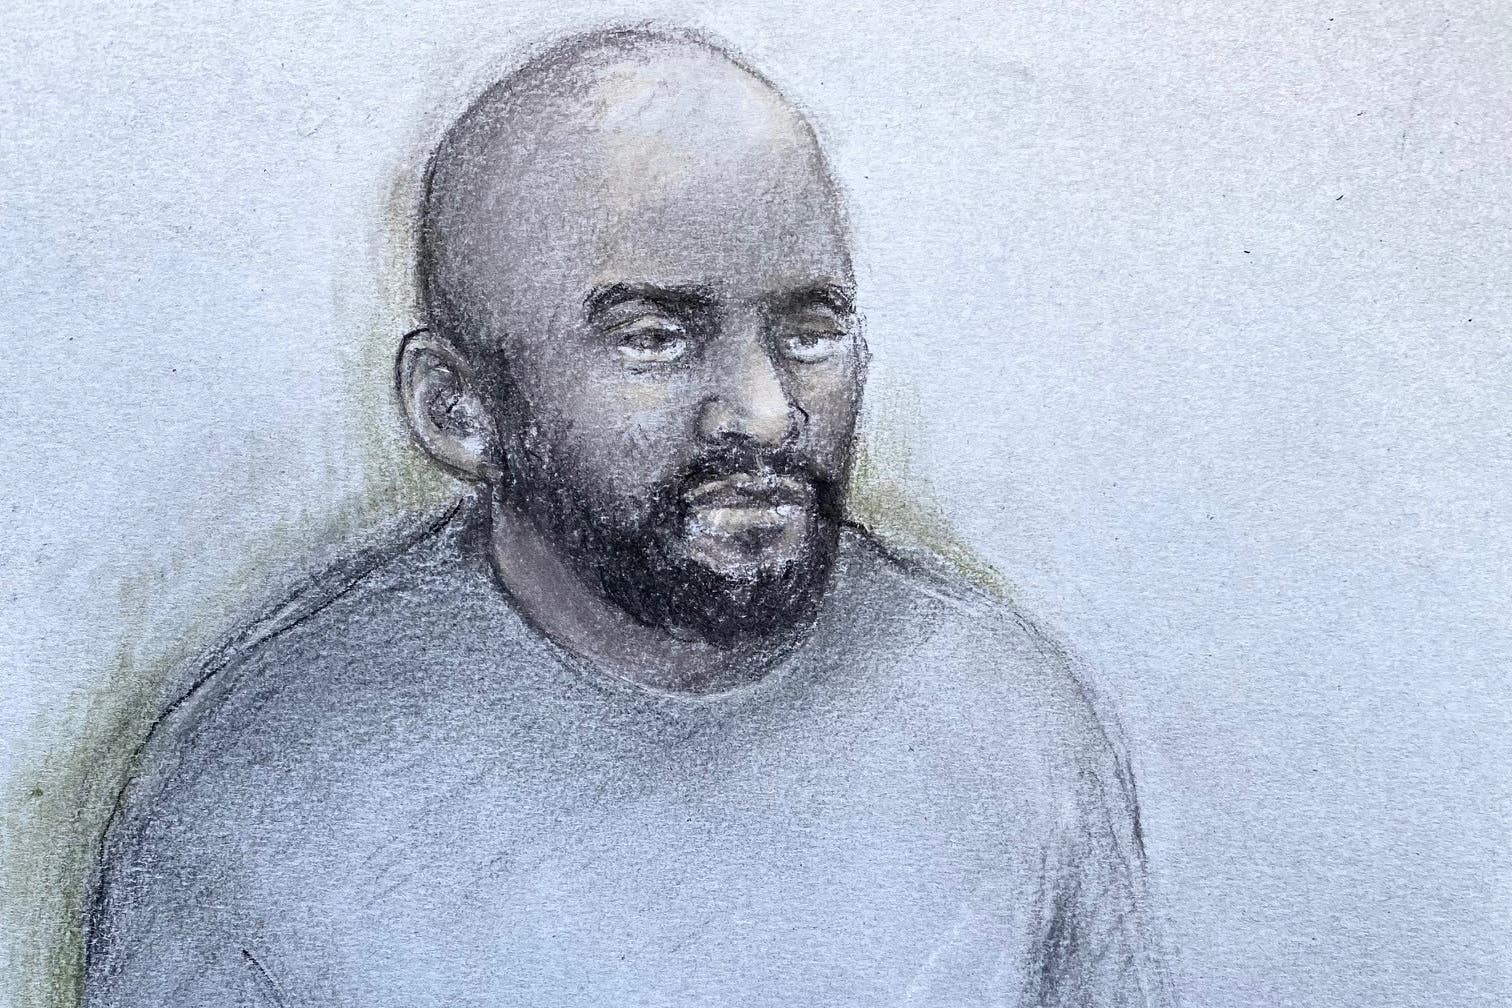 Davis, pictured in a court sketch, previously served a seven-and-a-half year sentence for membership of ISIS